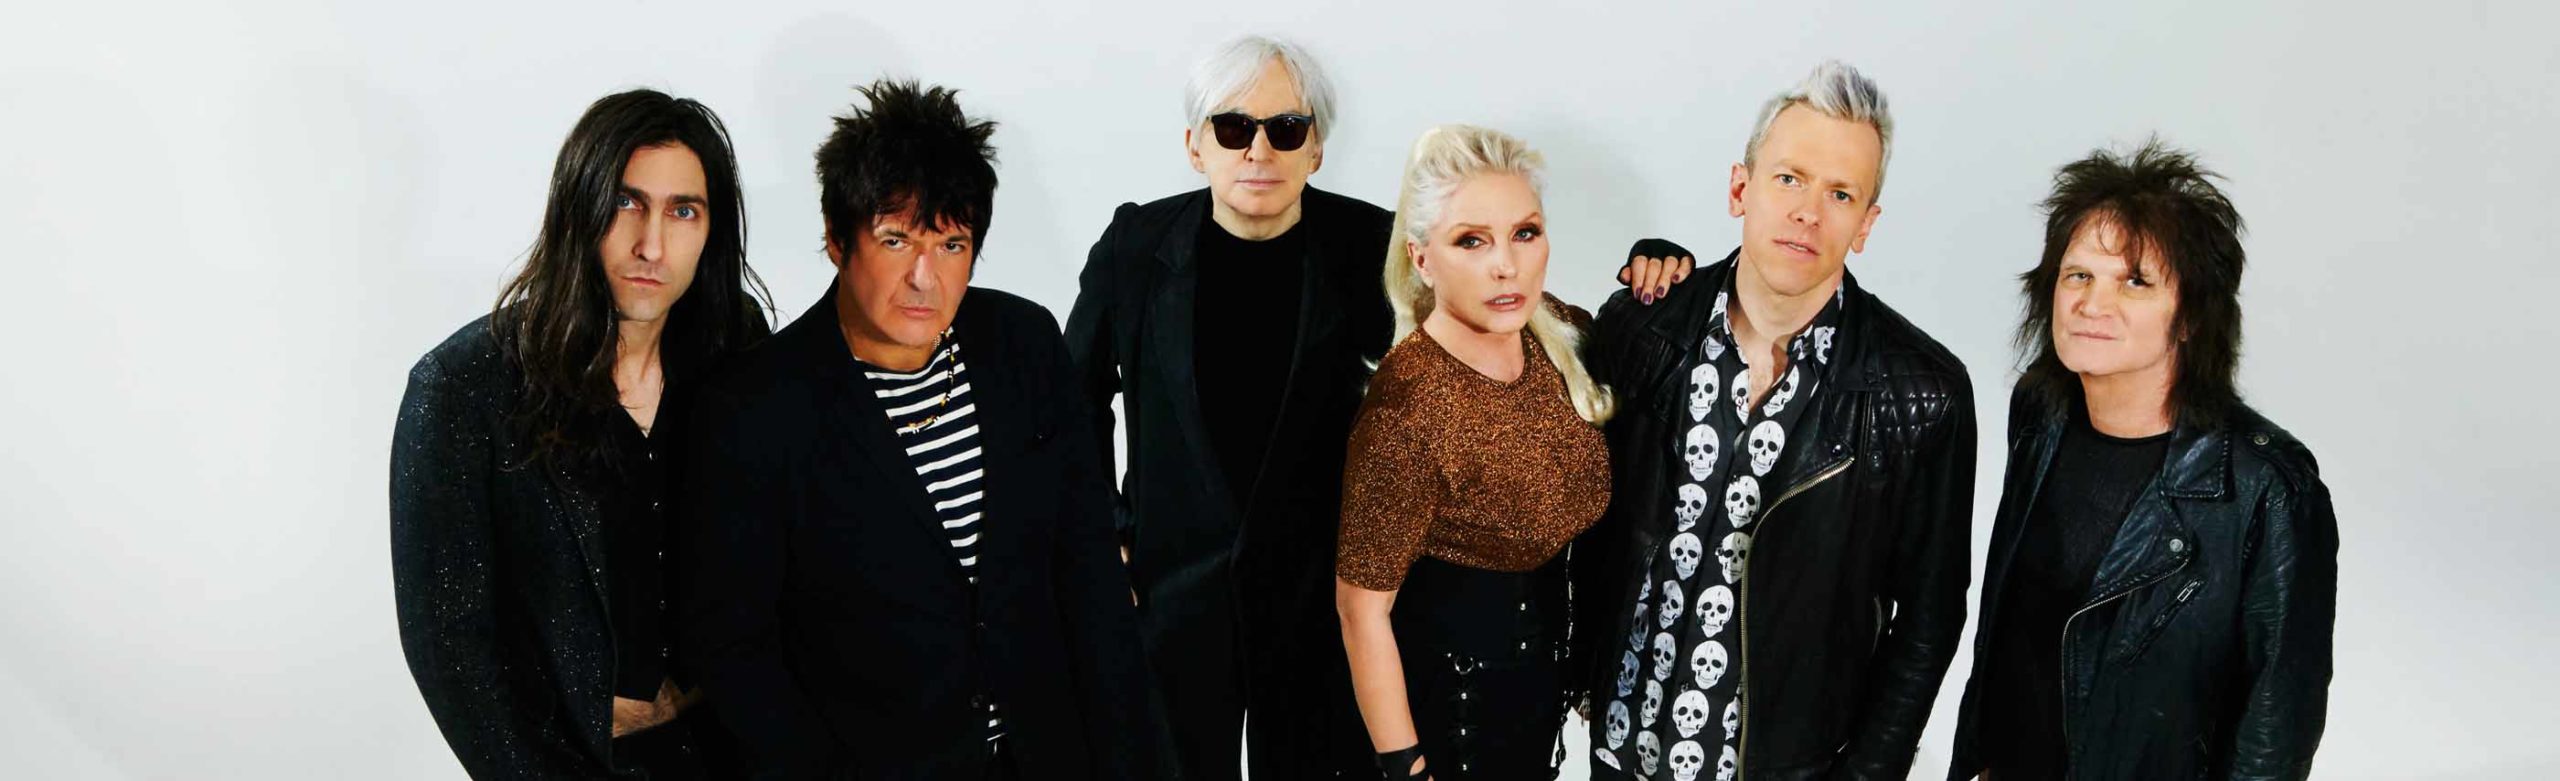 Event Info: Blondie at KettleHouse Amphitheater 2018 Image